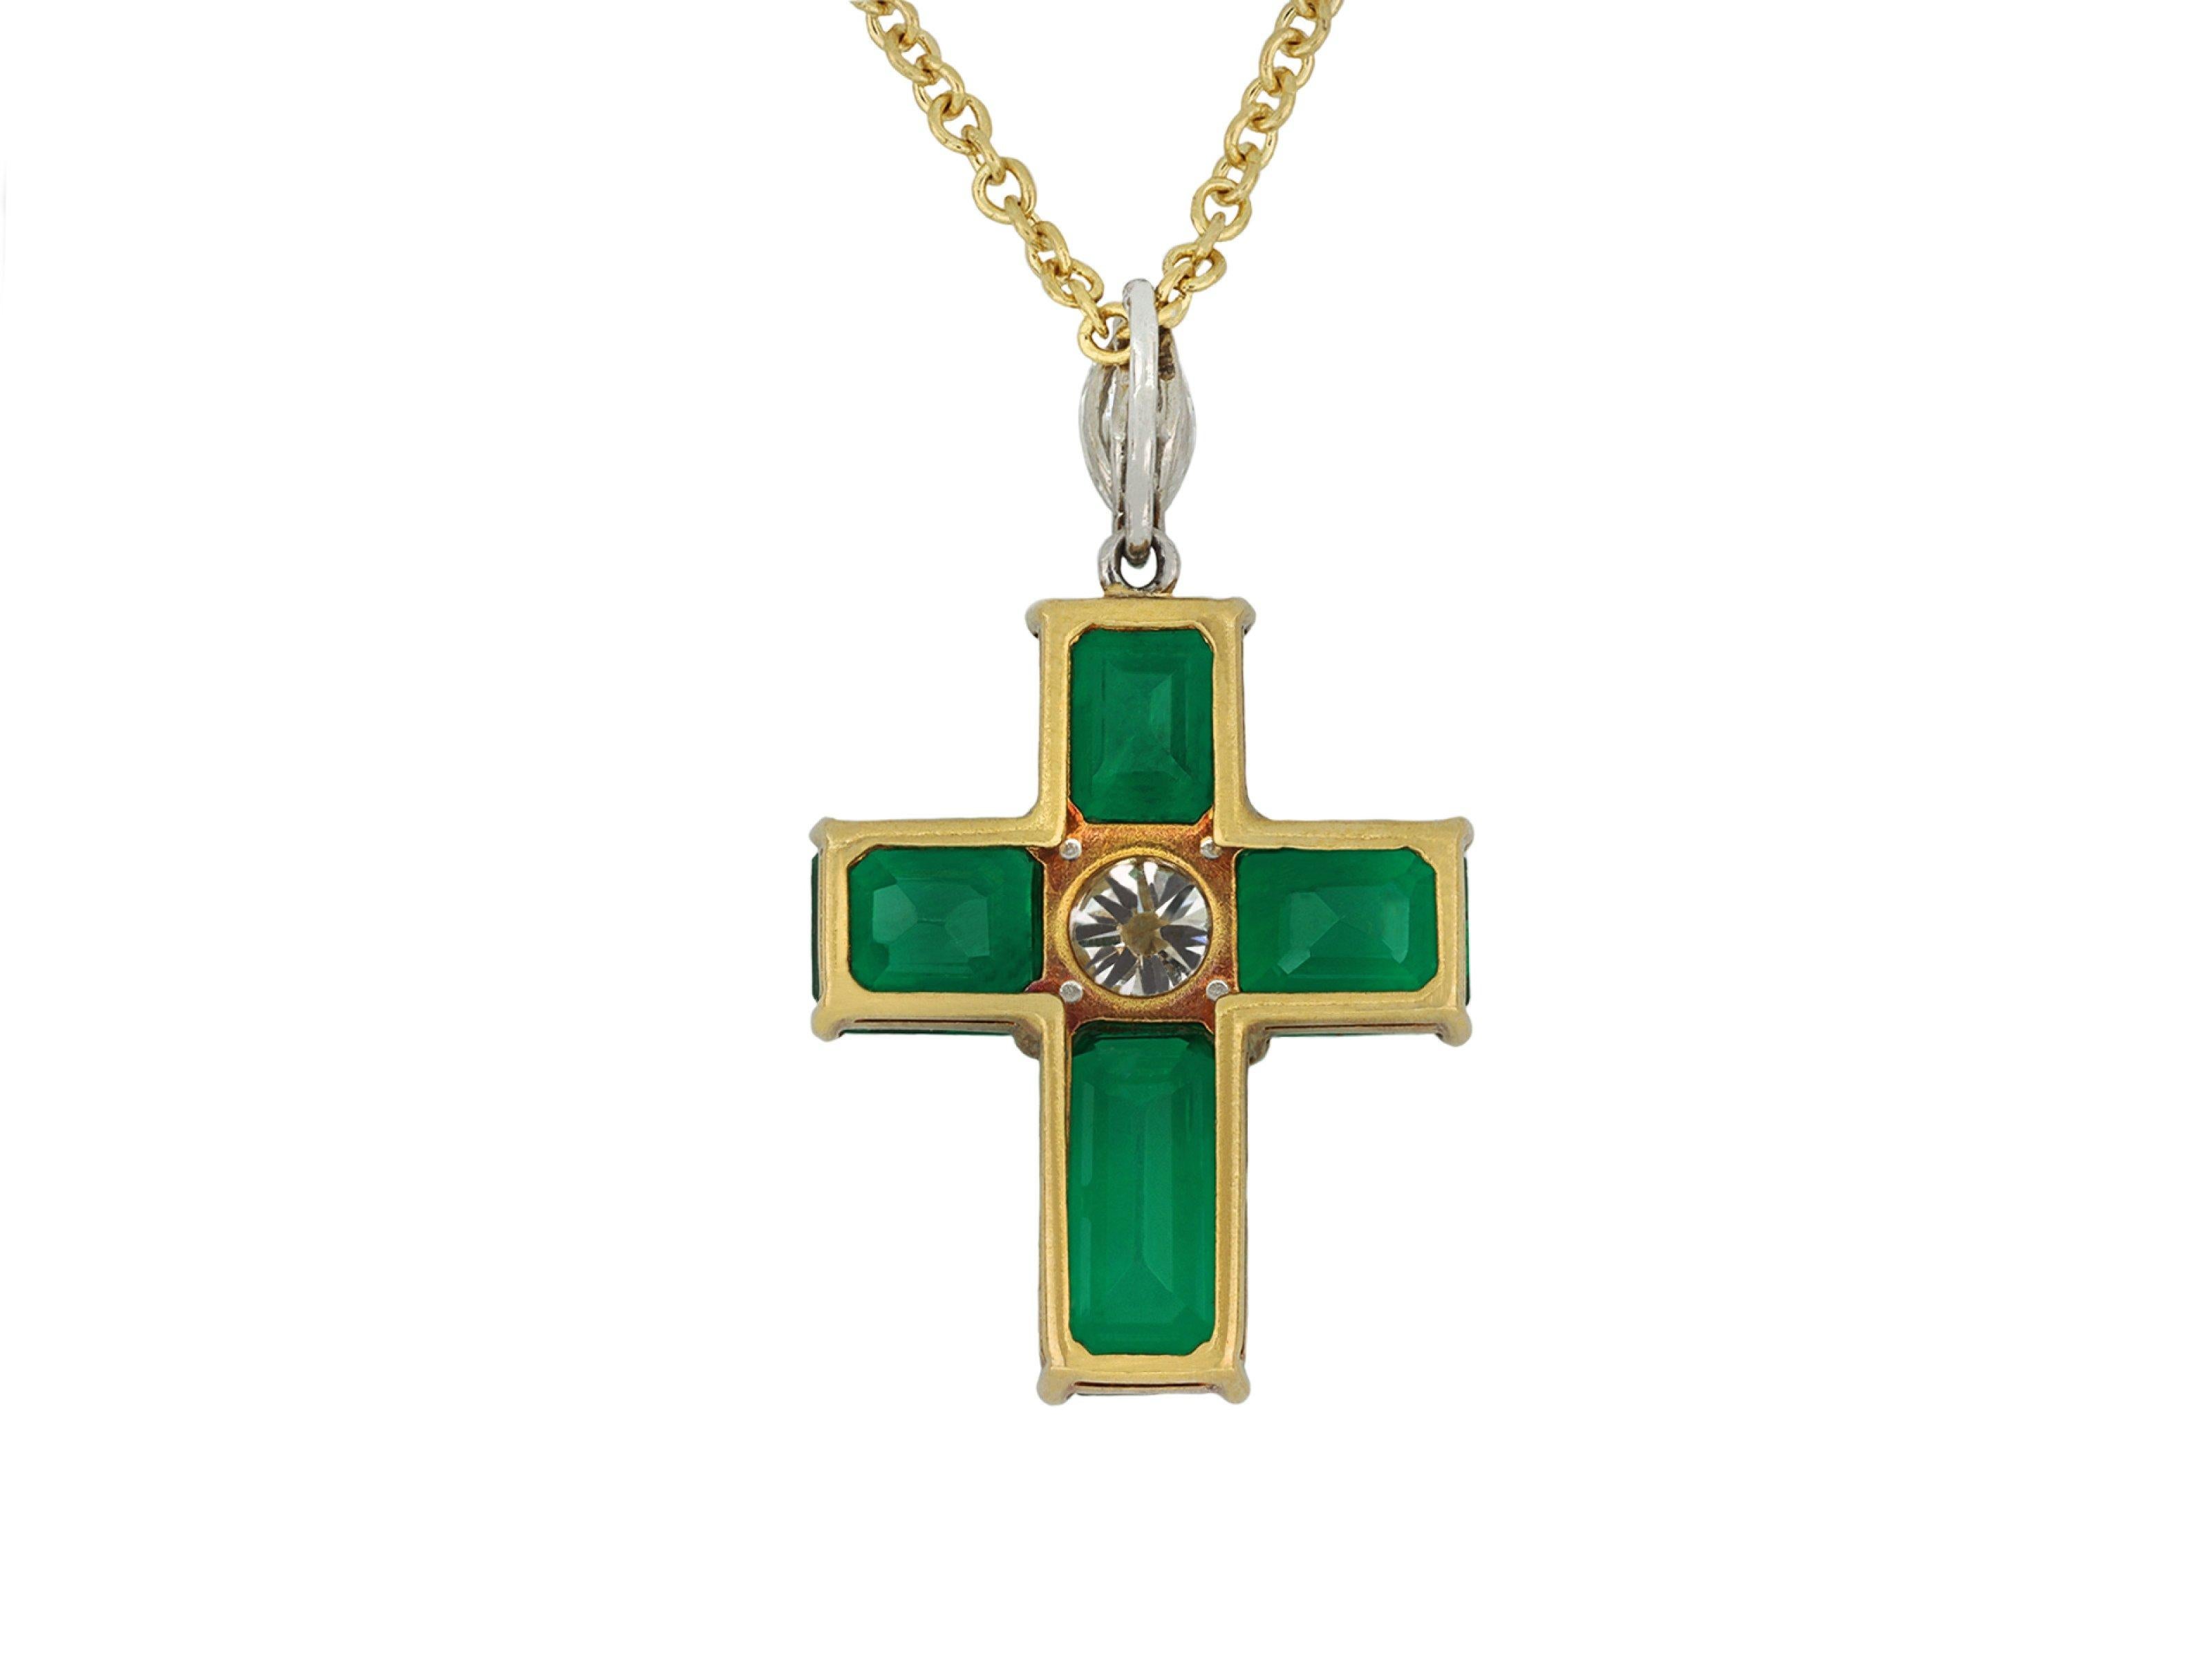 Colombian emerald and diamond cross pendant. Set to centre with a round transitional cut diamond in an open back claw setting with an approximate weight of 0.40 carats, flanked by four rectangular step-cut natural Colombian emeralds with minor